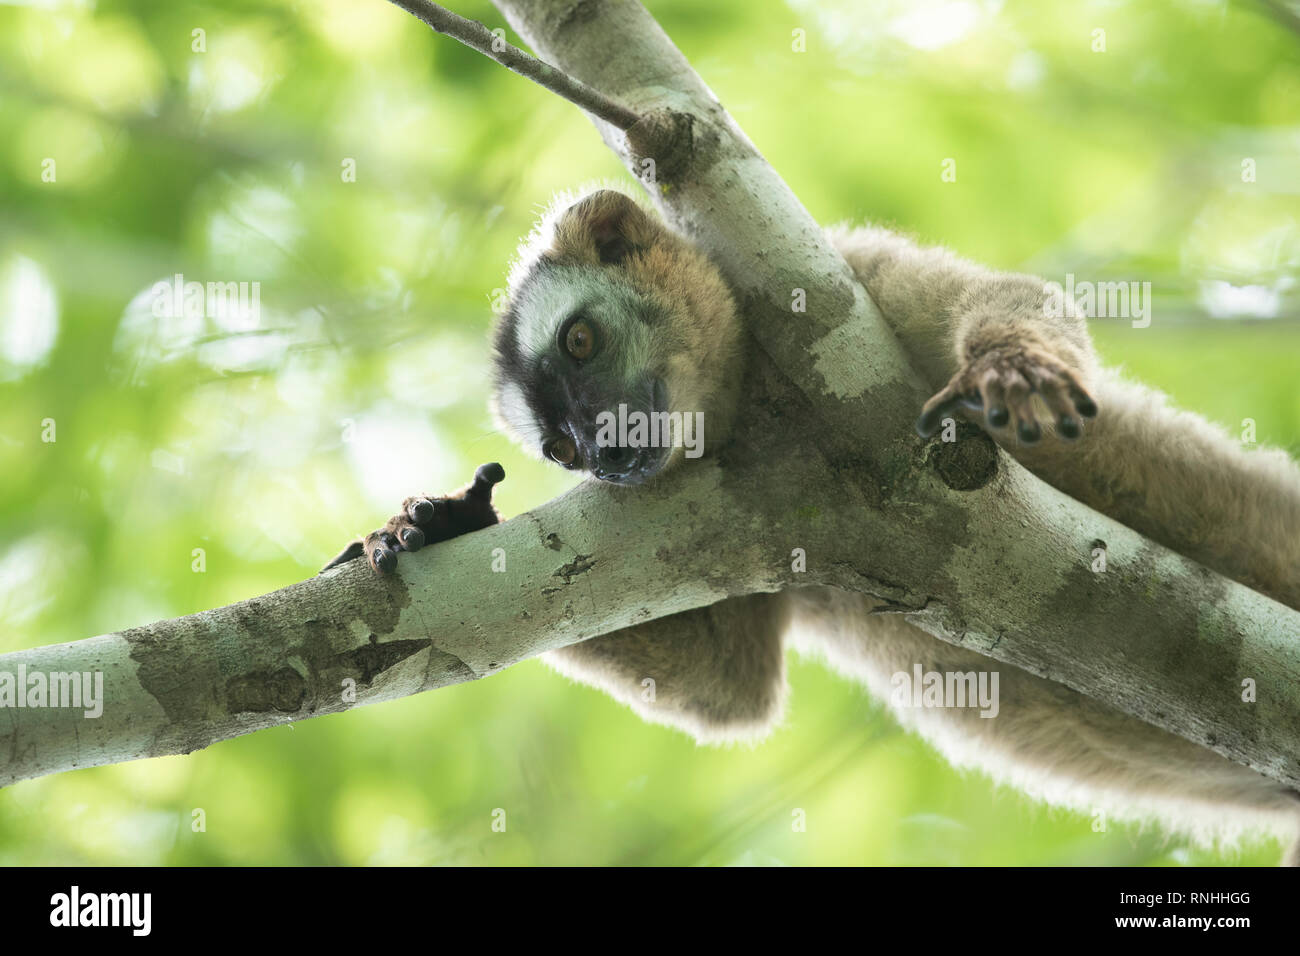 Red-fronted lemur (Eulemur rufifrons) Stock Photo